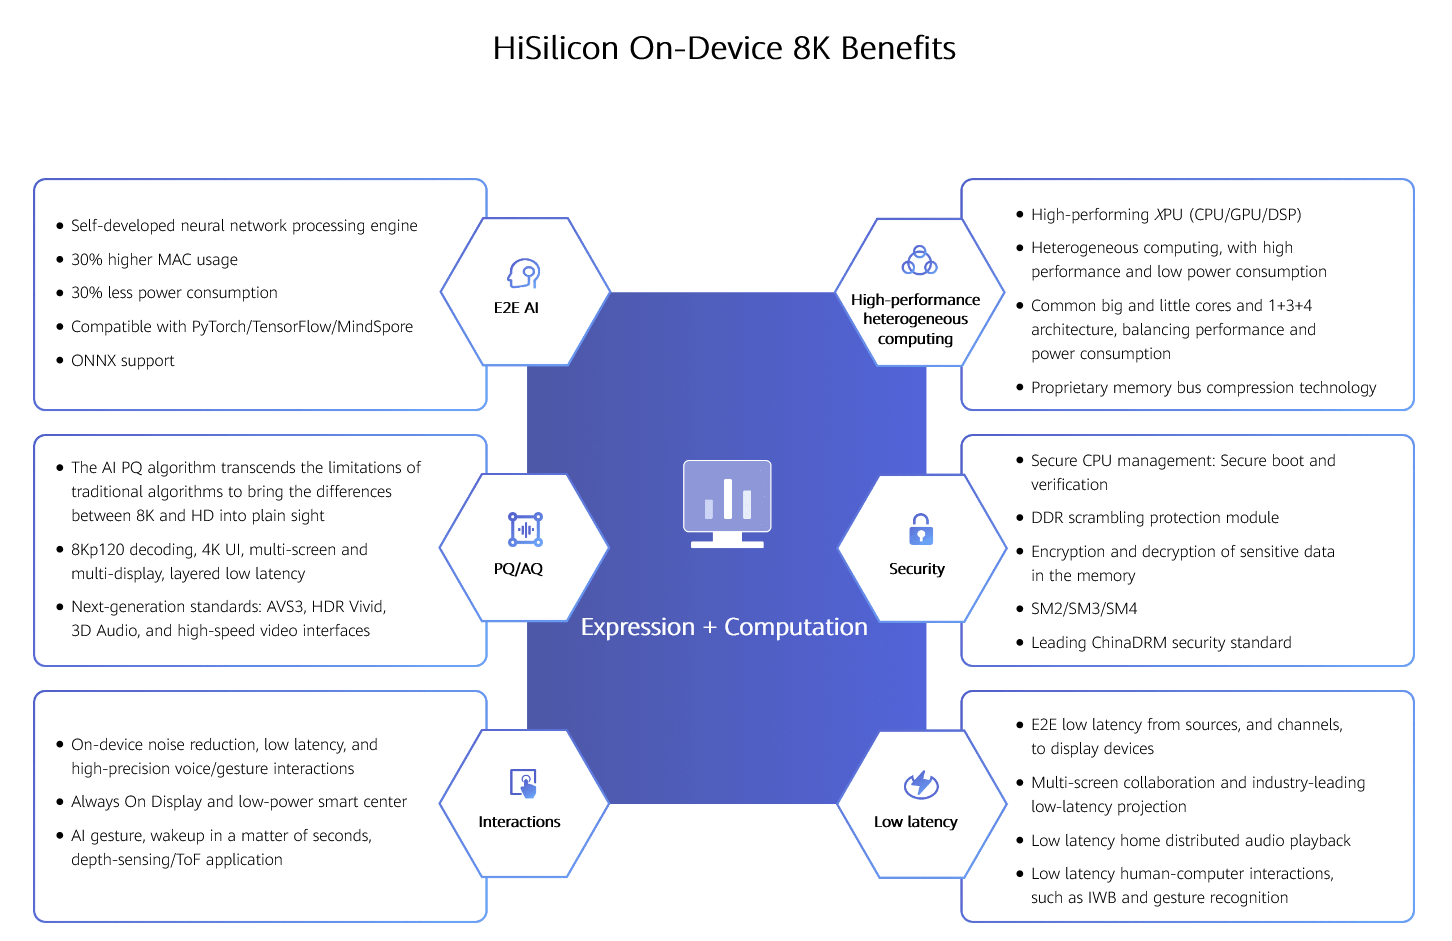 HiSilicon On-device 8K Solutions